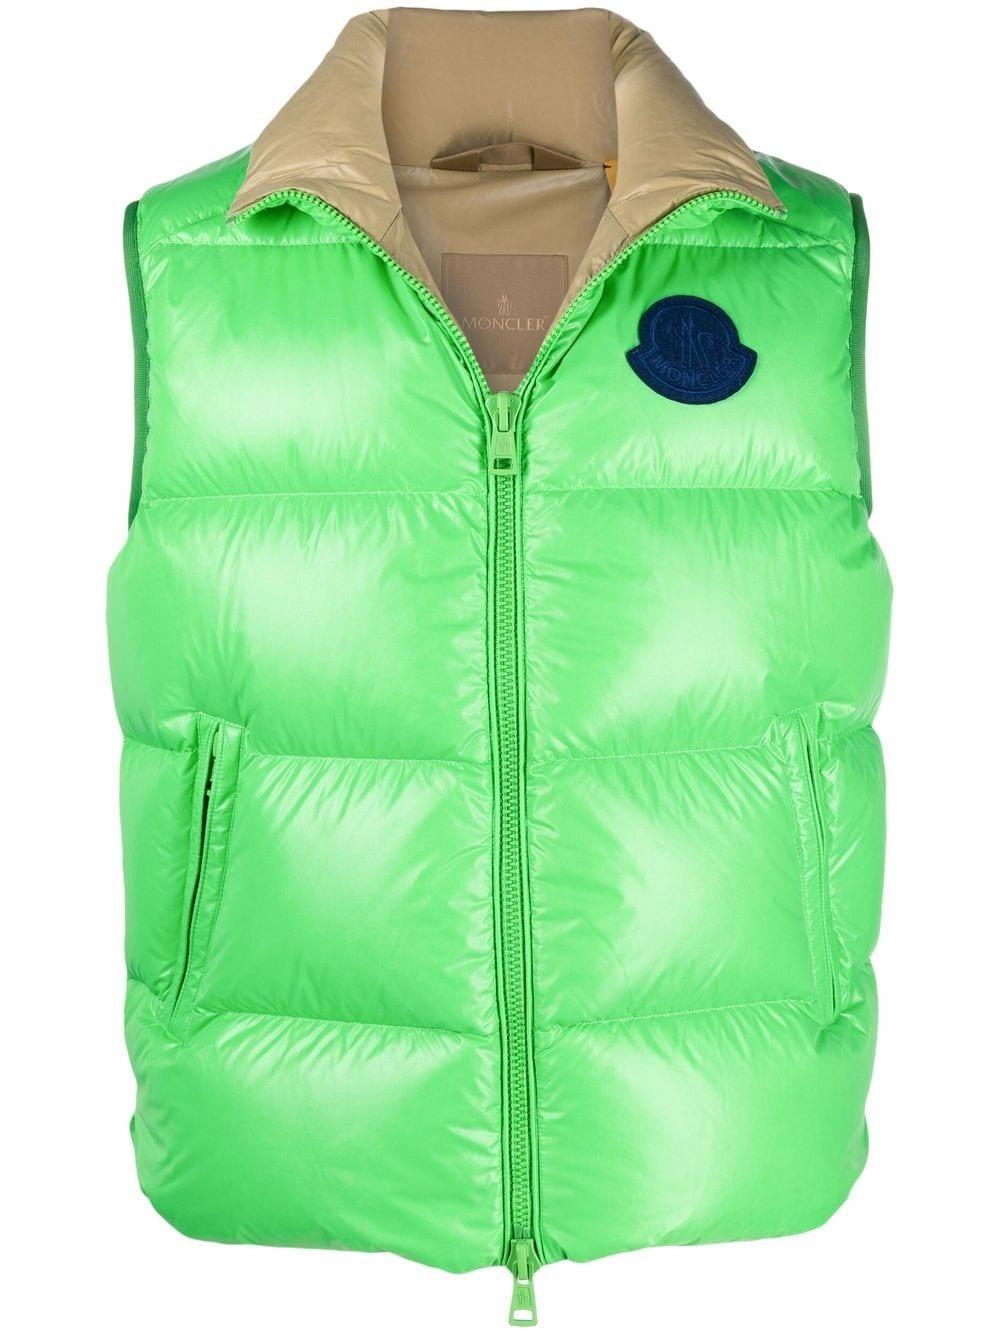 Moncler Genius Synthetic X 2 Moncler 1952 Sumida Padded Gilet in 